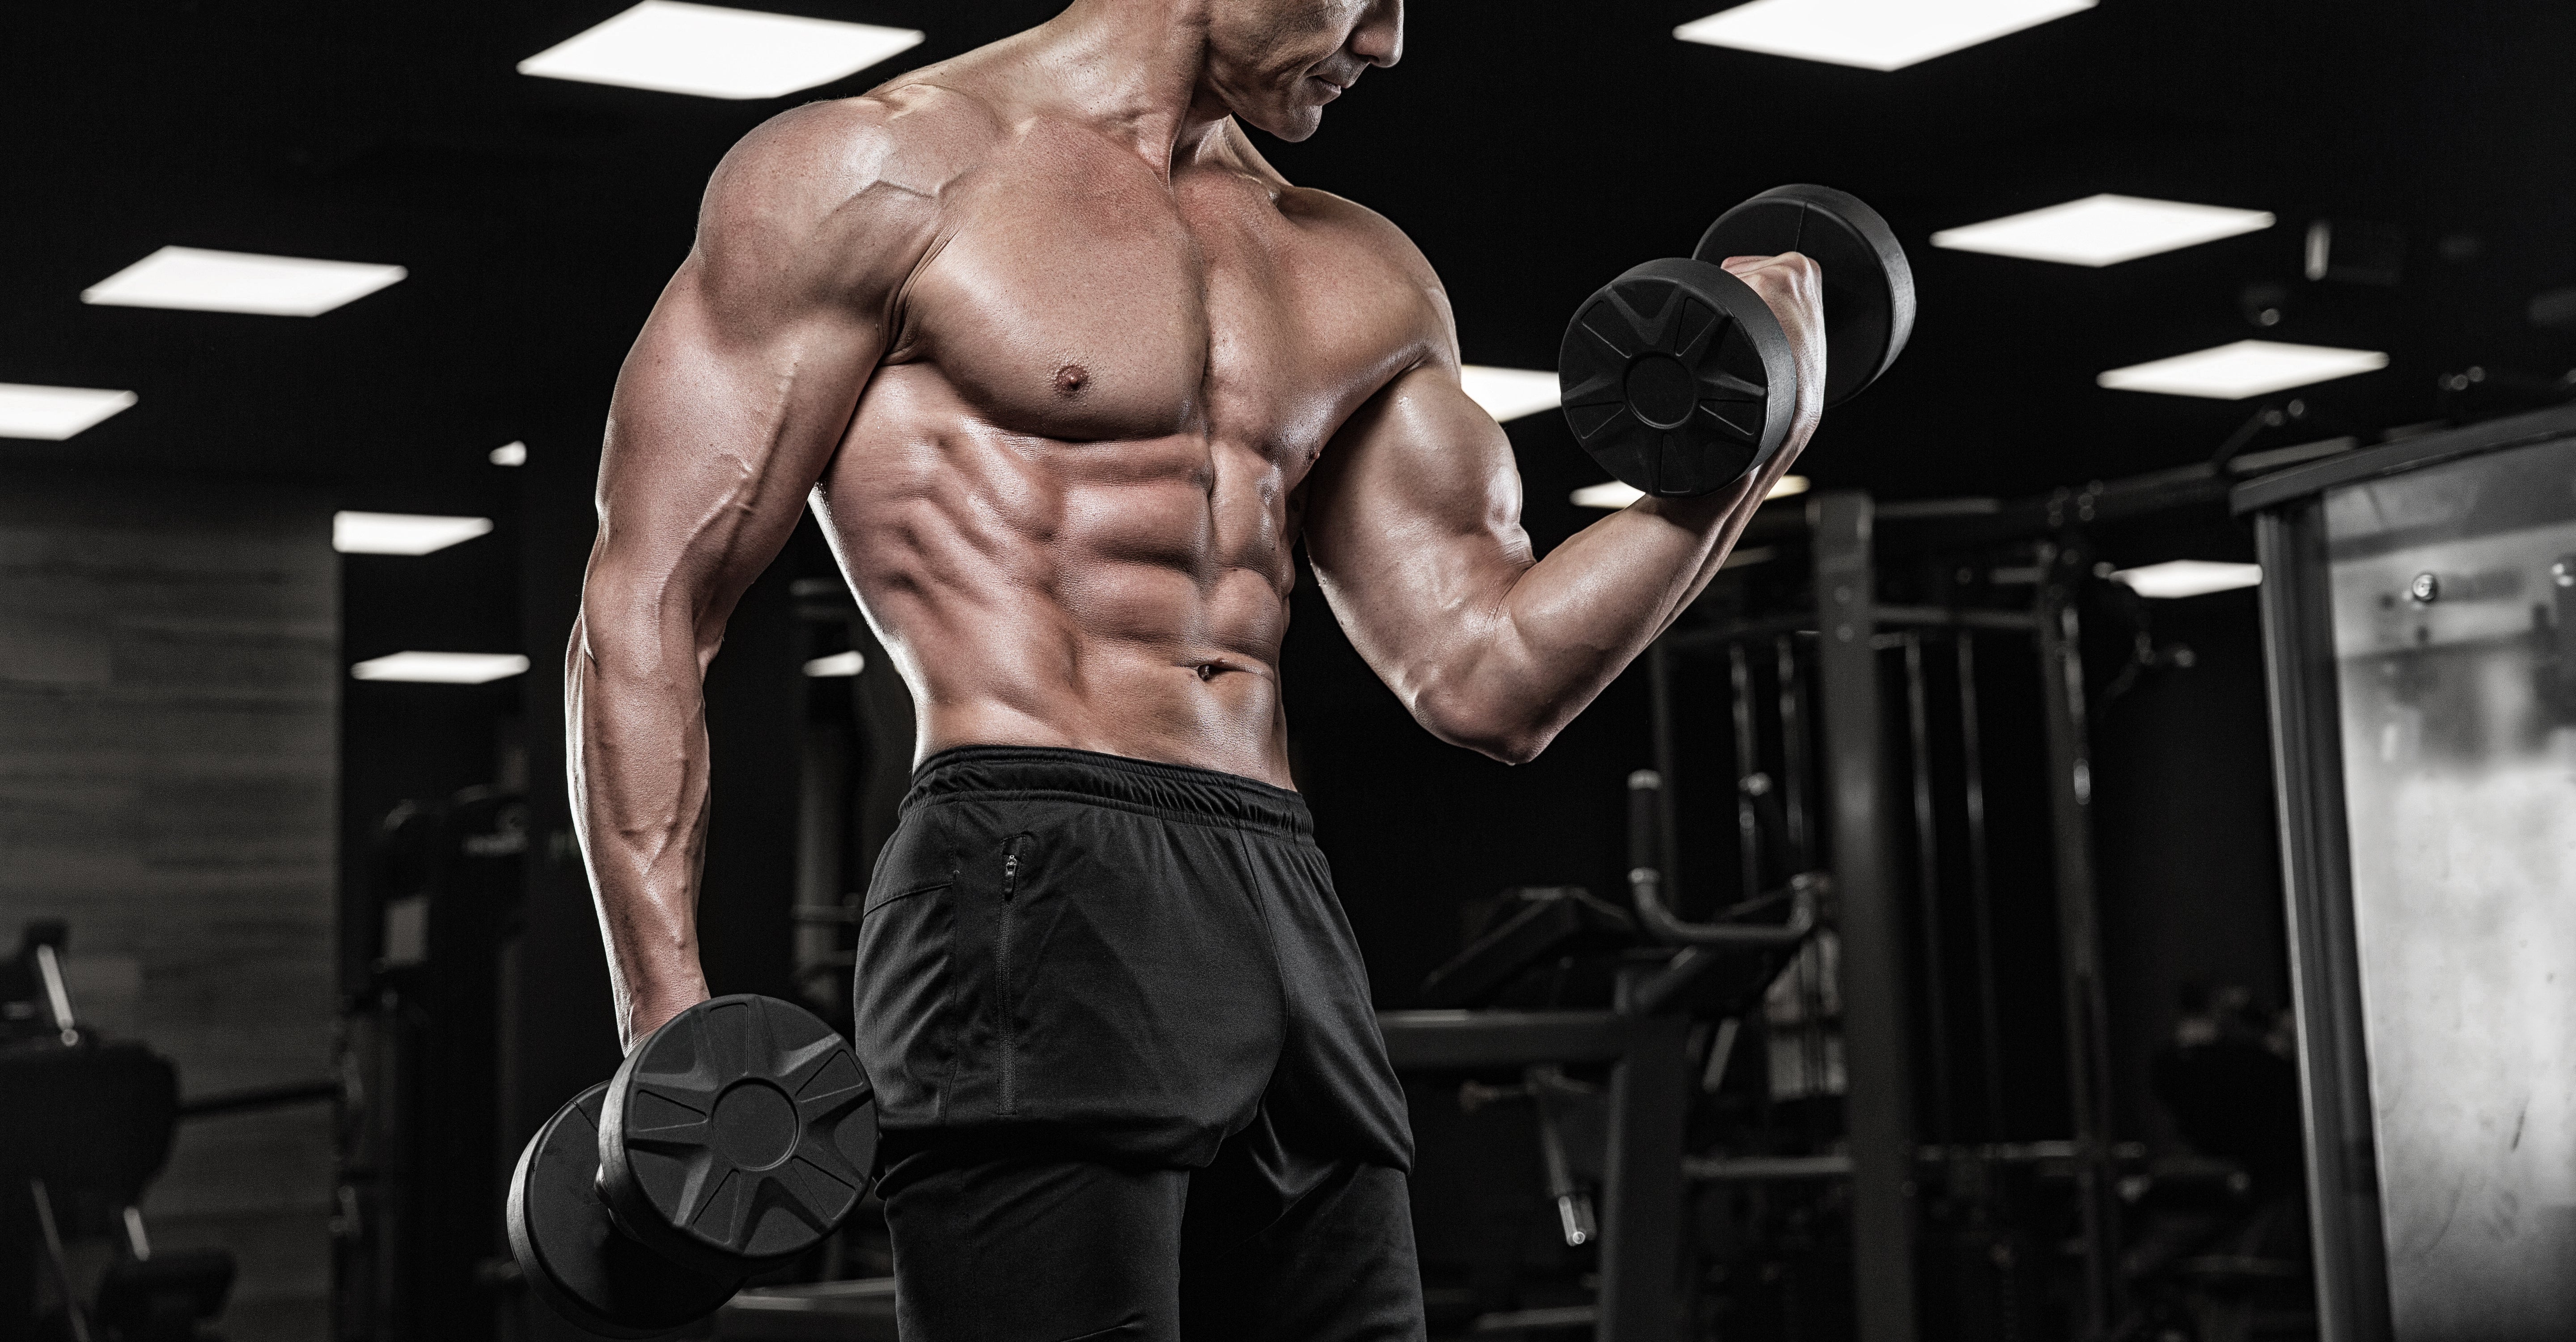 10 Best Middle Abdominal Workouts for Chiseled Abs - Steel Supplements